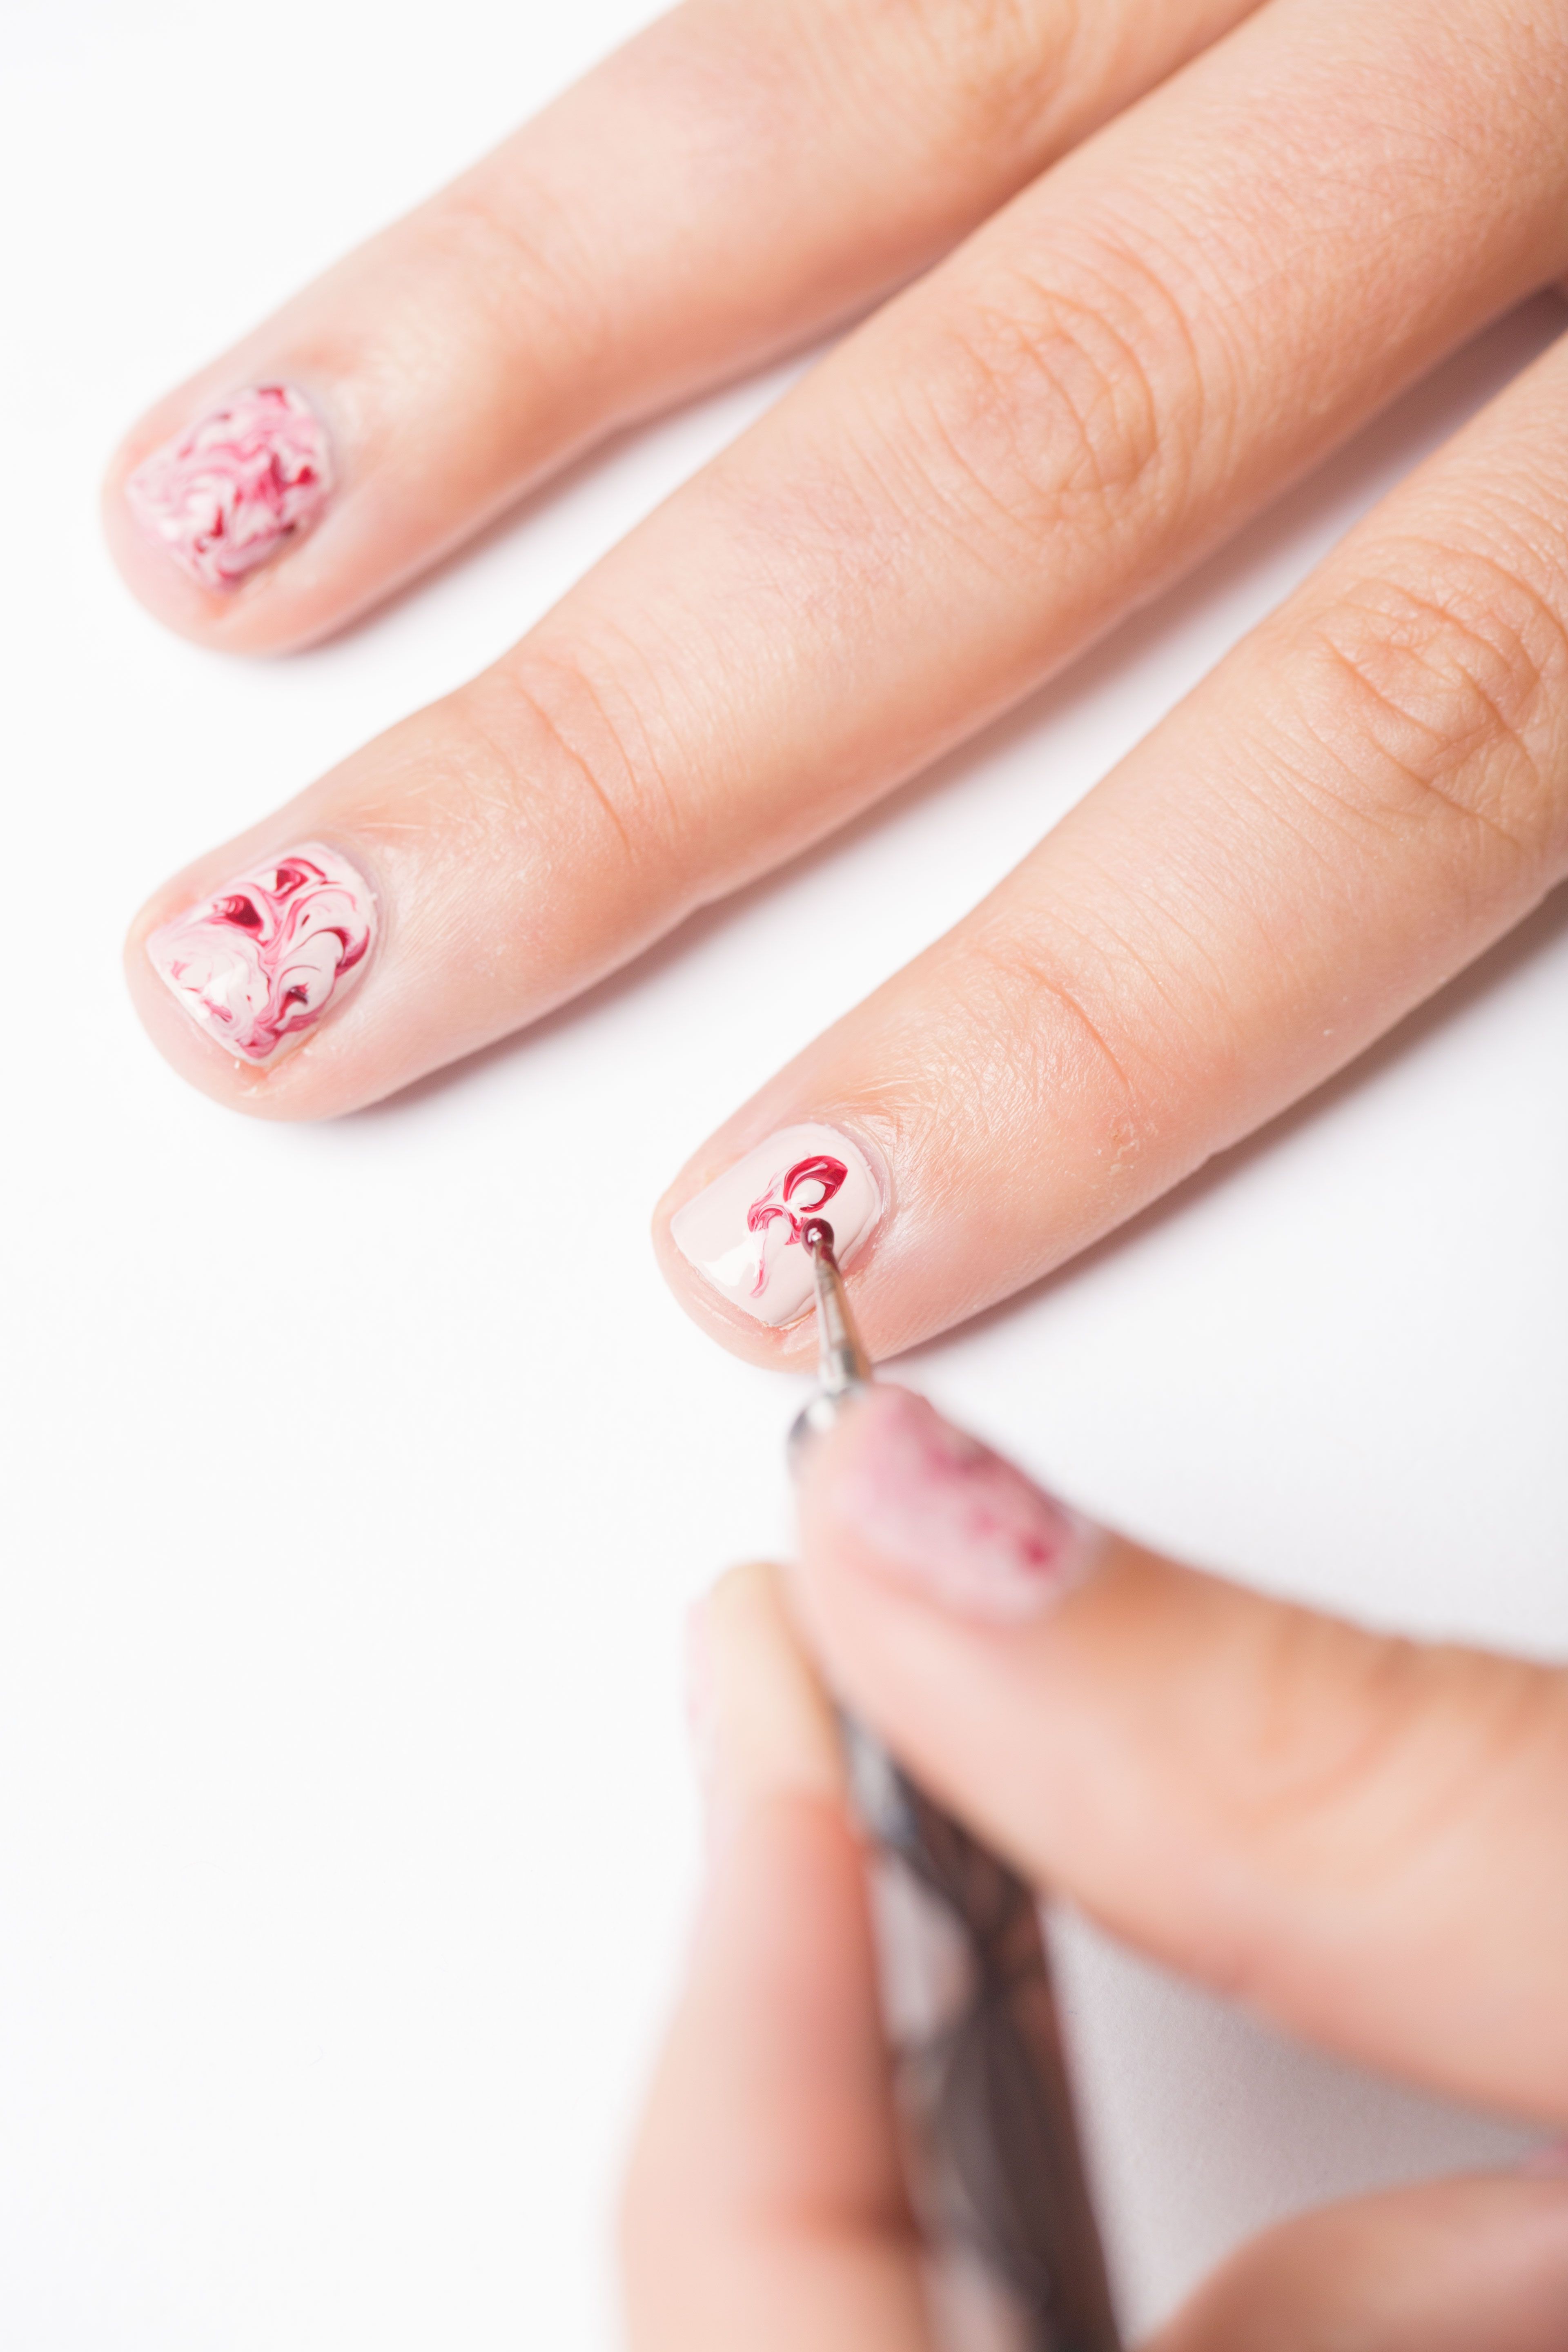 13 Simple Nail Art Designs That You Should Definitely Try | Her Circle